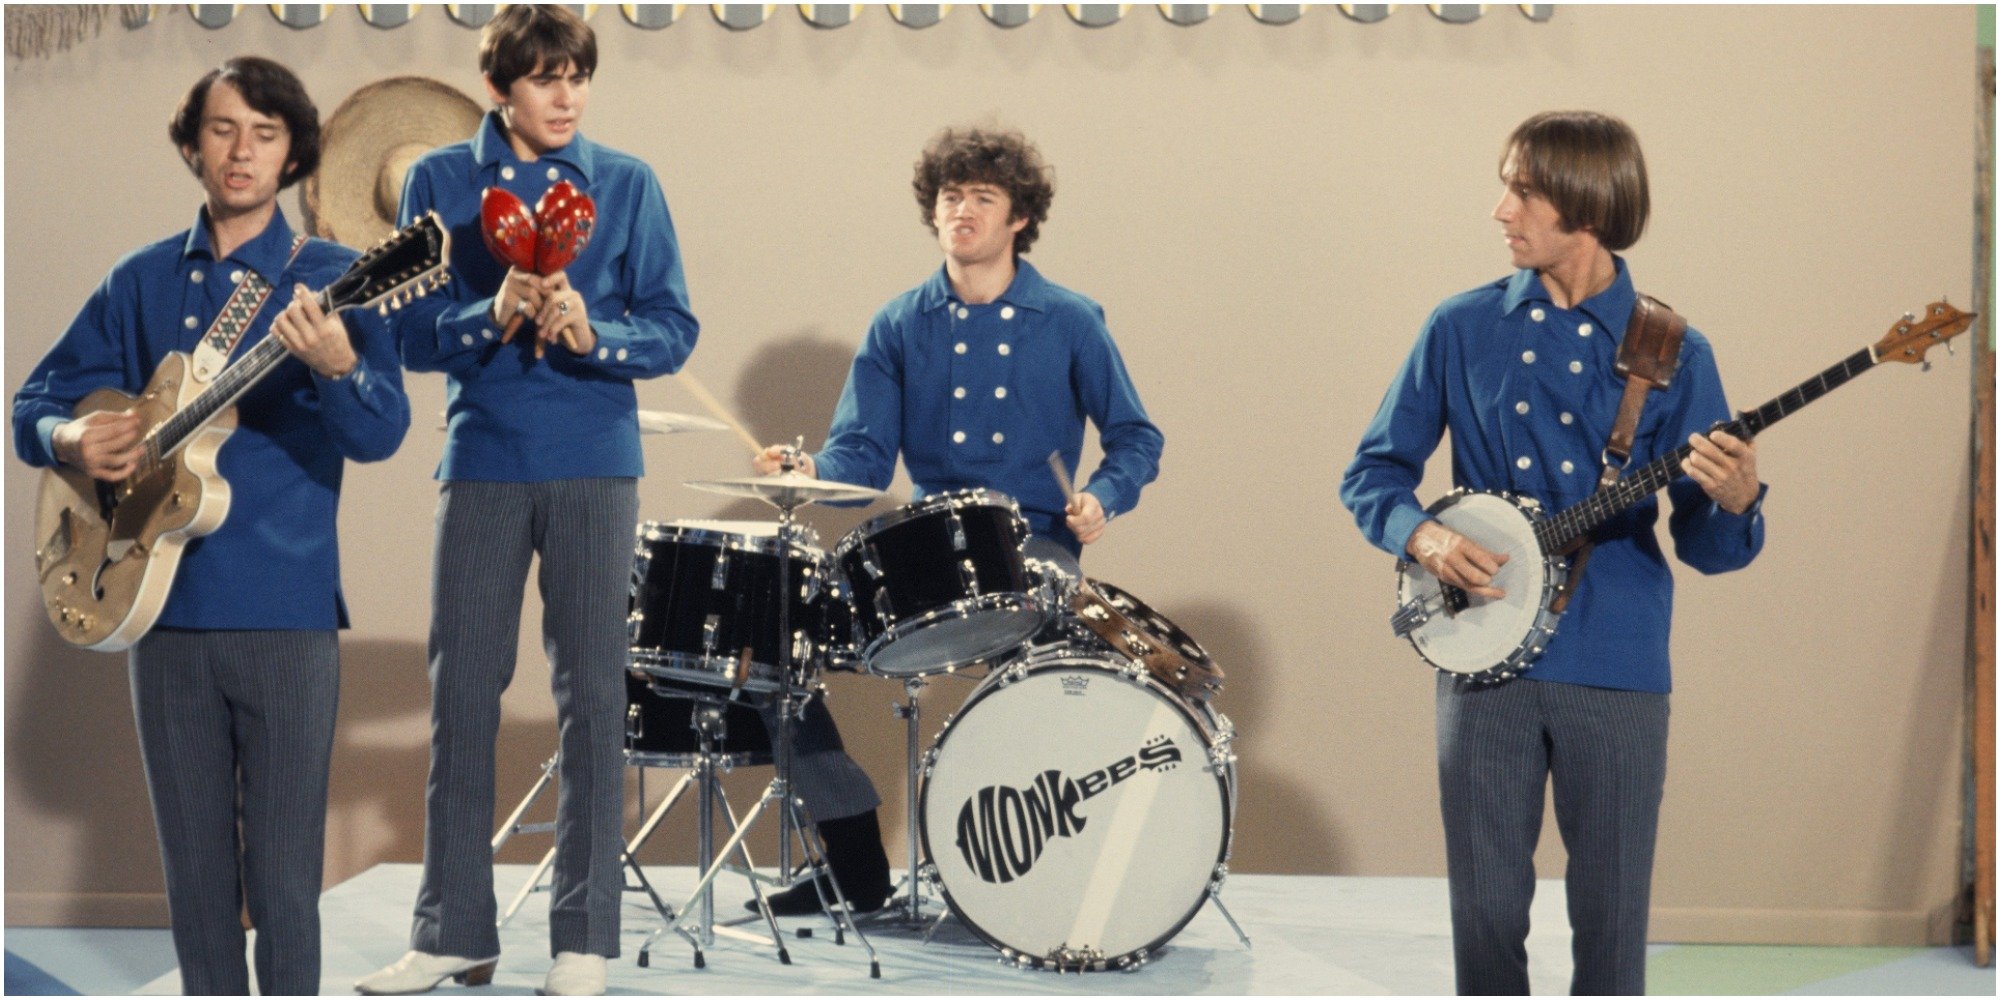 The Monkees on the set of their television series.